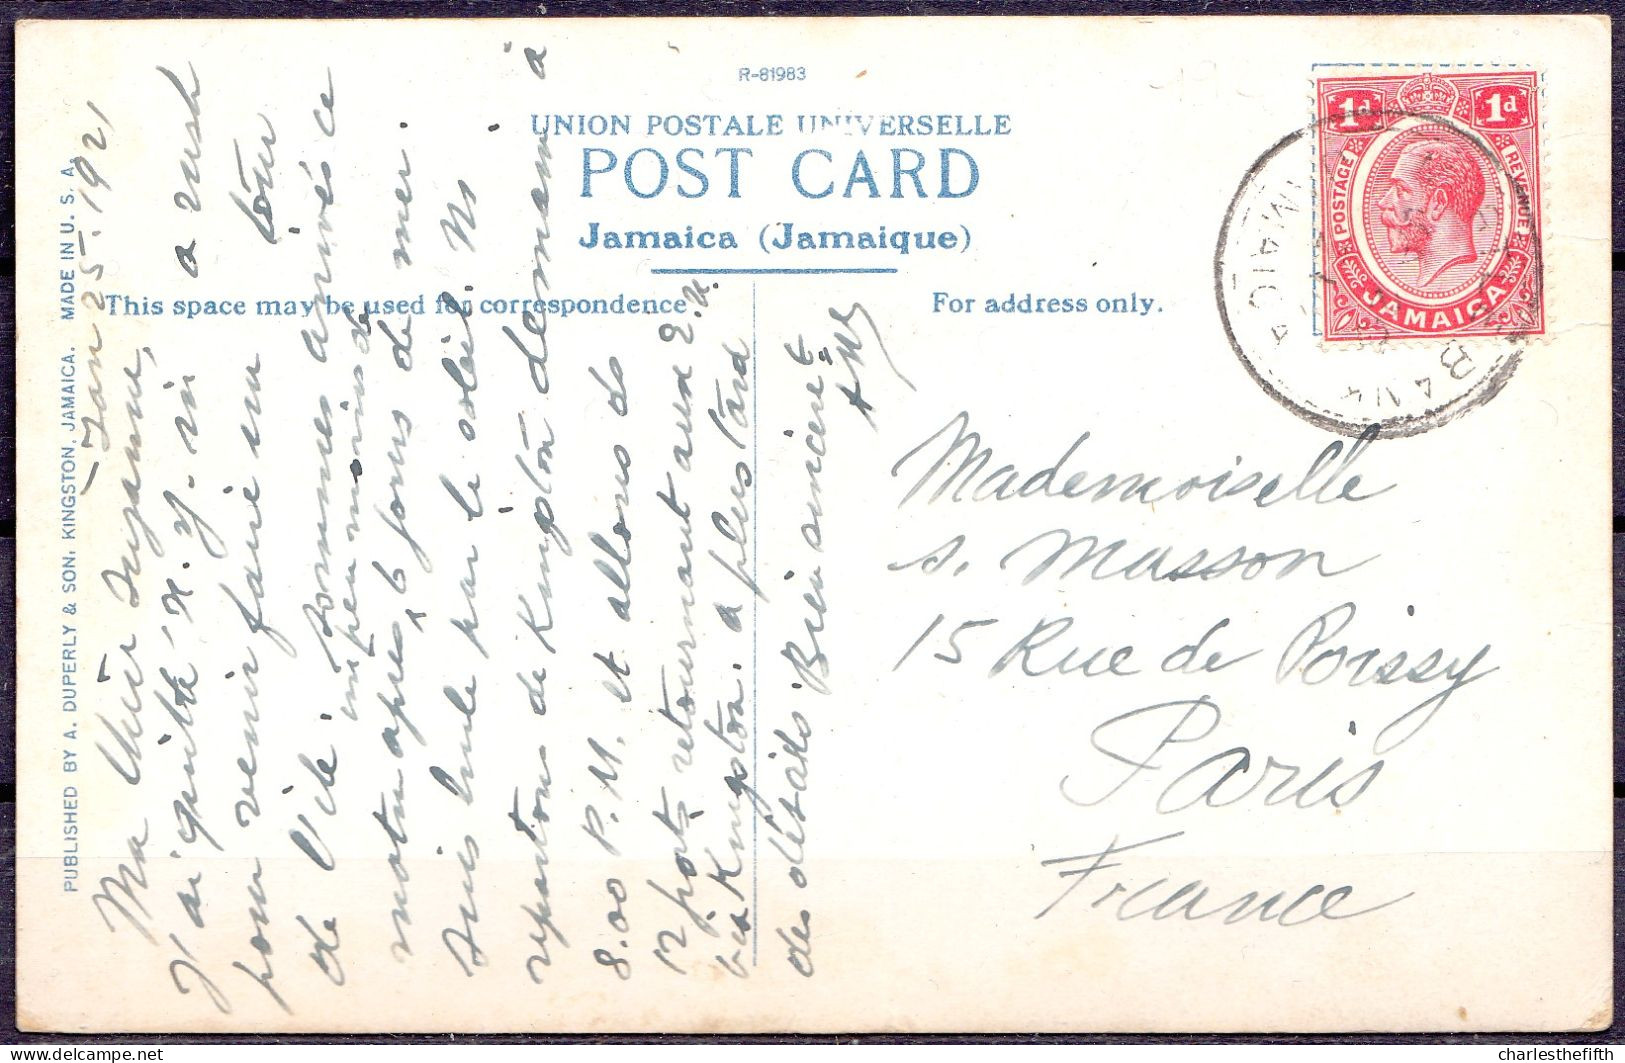 GREETINGS FROM JAMAICA 1921 ( = British West Indies - See Stamp ) - KING STREET KINGSTON - PUBLIC BUILDING - Jamaica